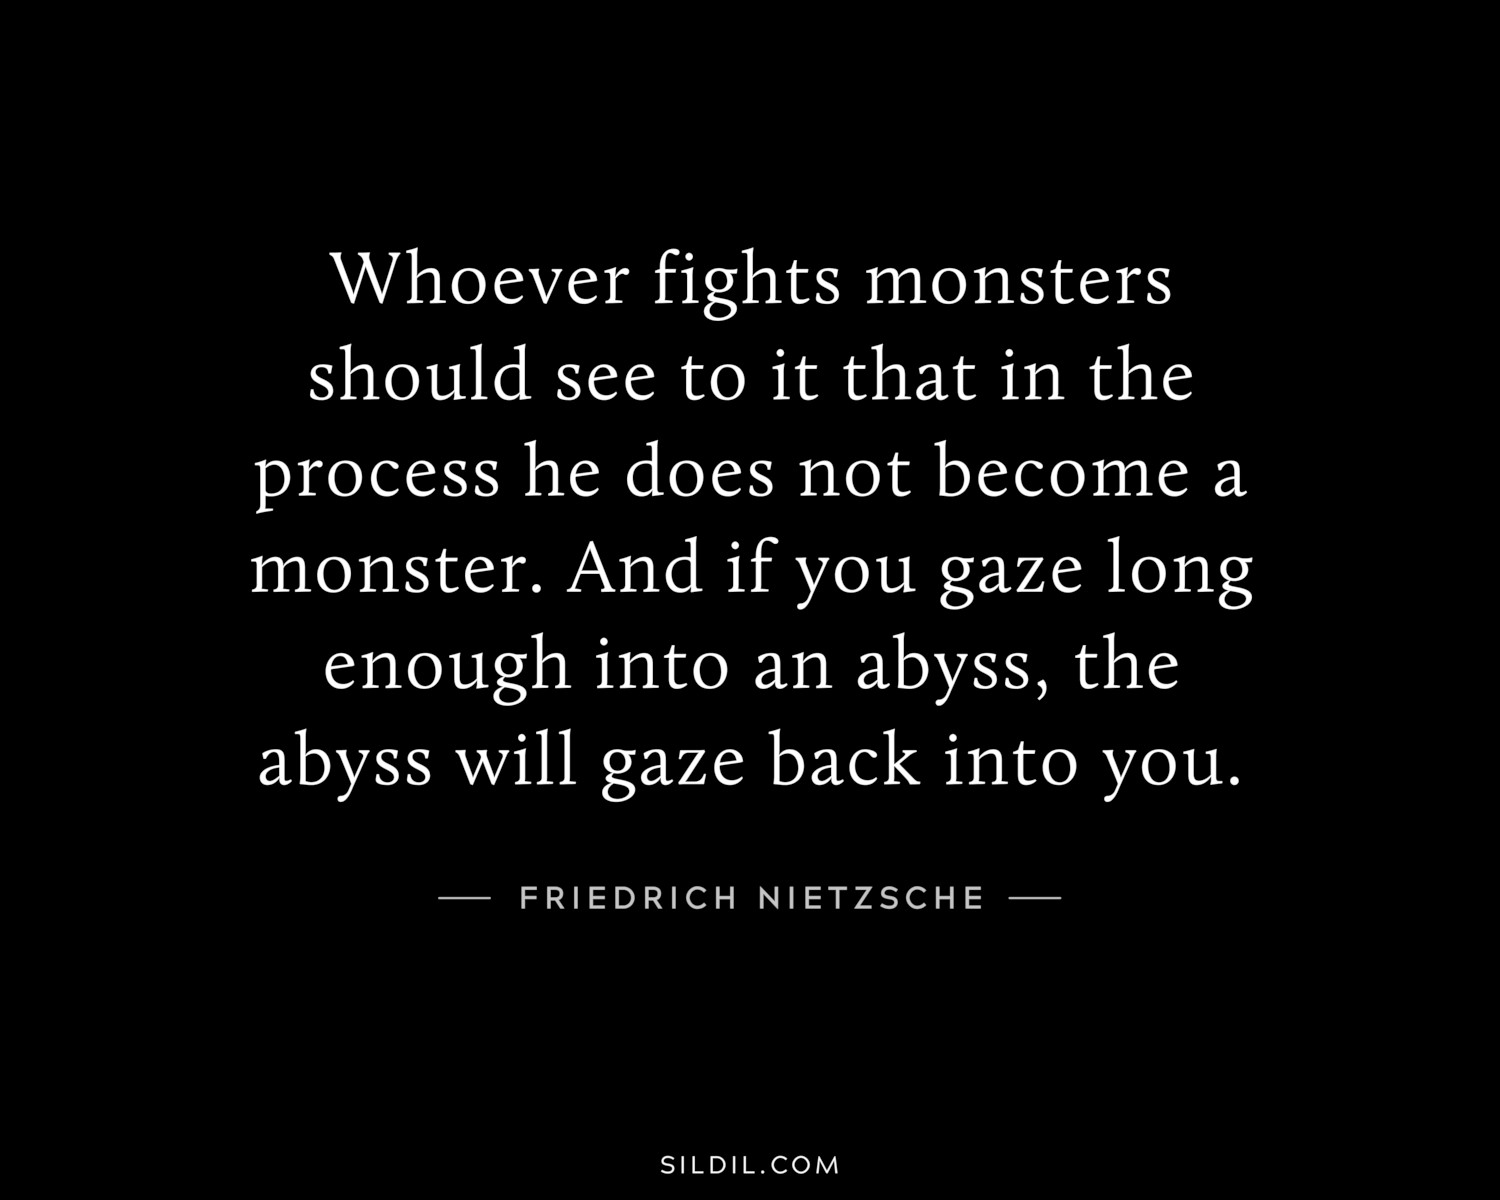 Whoever fights monsters should see to it that in the process he does not become a monster. And if you gaze long enough into an abyss, the abyss will gaze back into you.